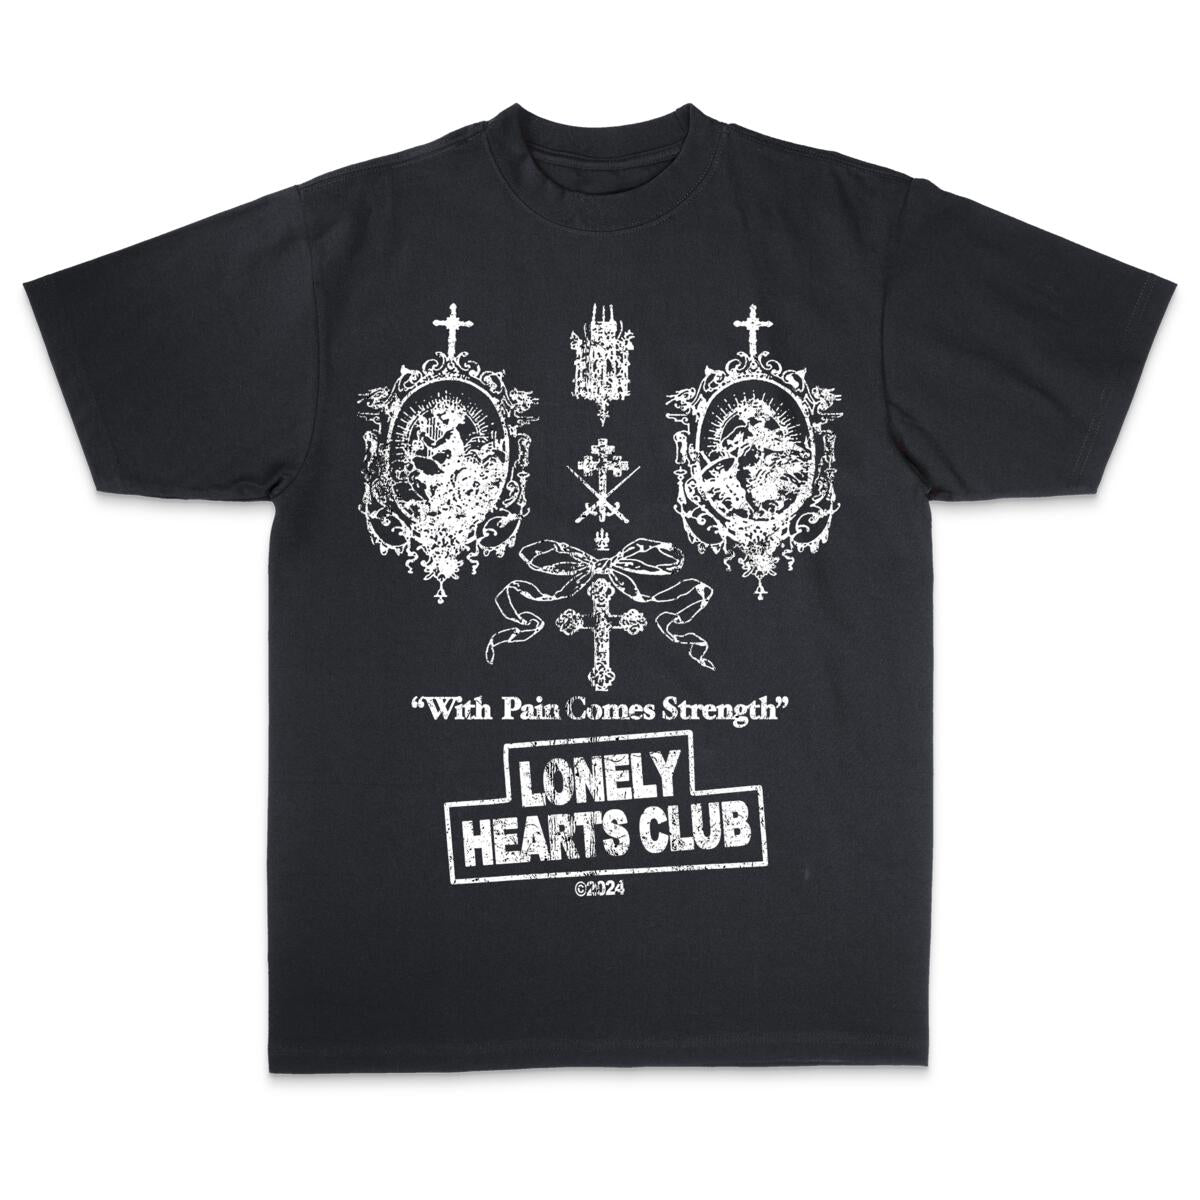 Lonely Hearts Club - With Pain Comes Strength Premium T-Shirt